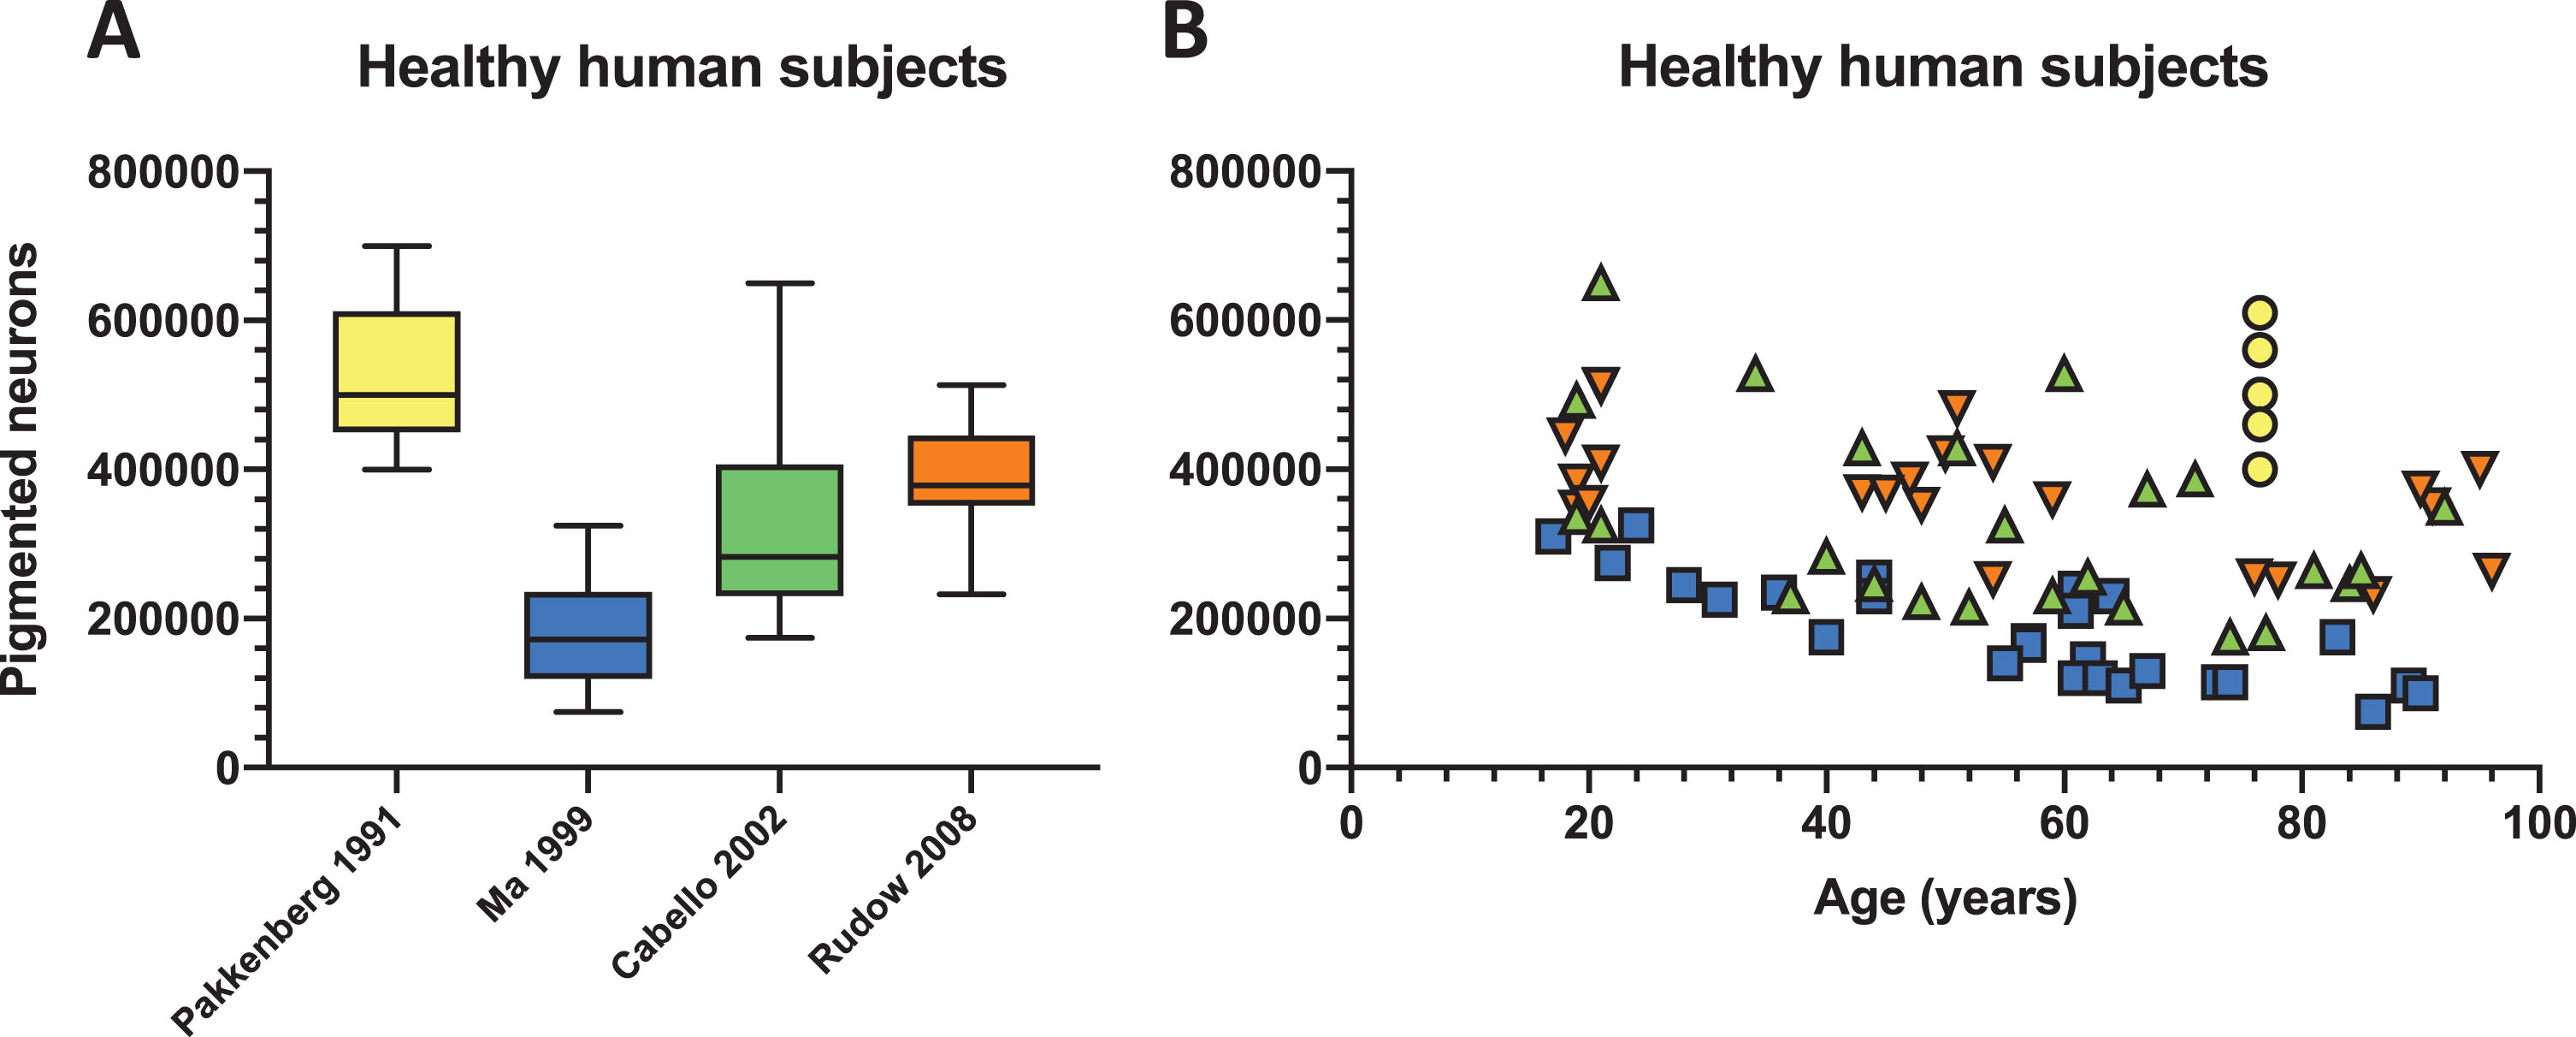 Natural variation in the number of pigmented neurons in healthy human. Four studies employing stereological quantification of the number of nigral pigmented neurons [9, 15–17] were selected and (A) depicted in a box and whisker plot showing considerable variation in healthy human subjects. (B) The same data were also plotted against ageing where the first five decades where the brain should be relatively unaffected by various confounders (e.g., ageing) retains a high degree of variability in the number of pigmented neurons. Some aged individuals in the eighth and ninth decade show a very high number of pigmented neurons comparable to individuals in their twenties.